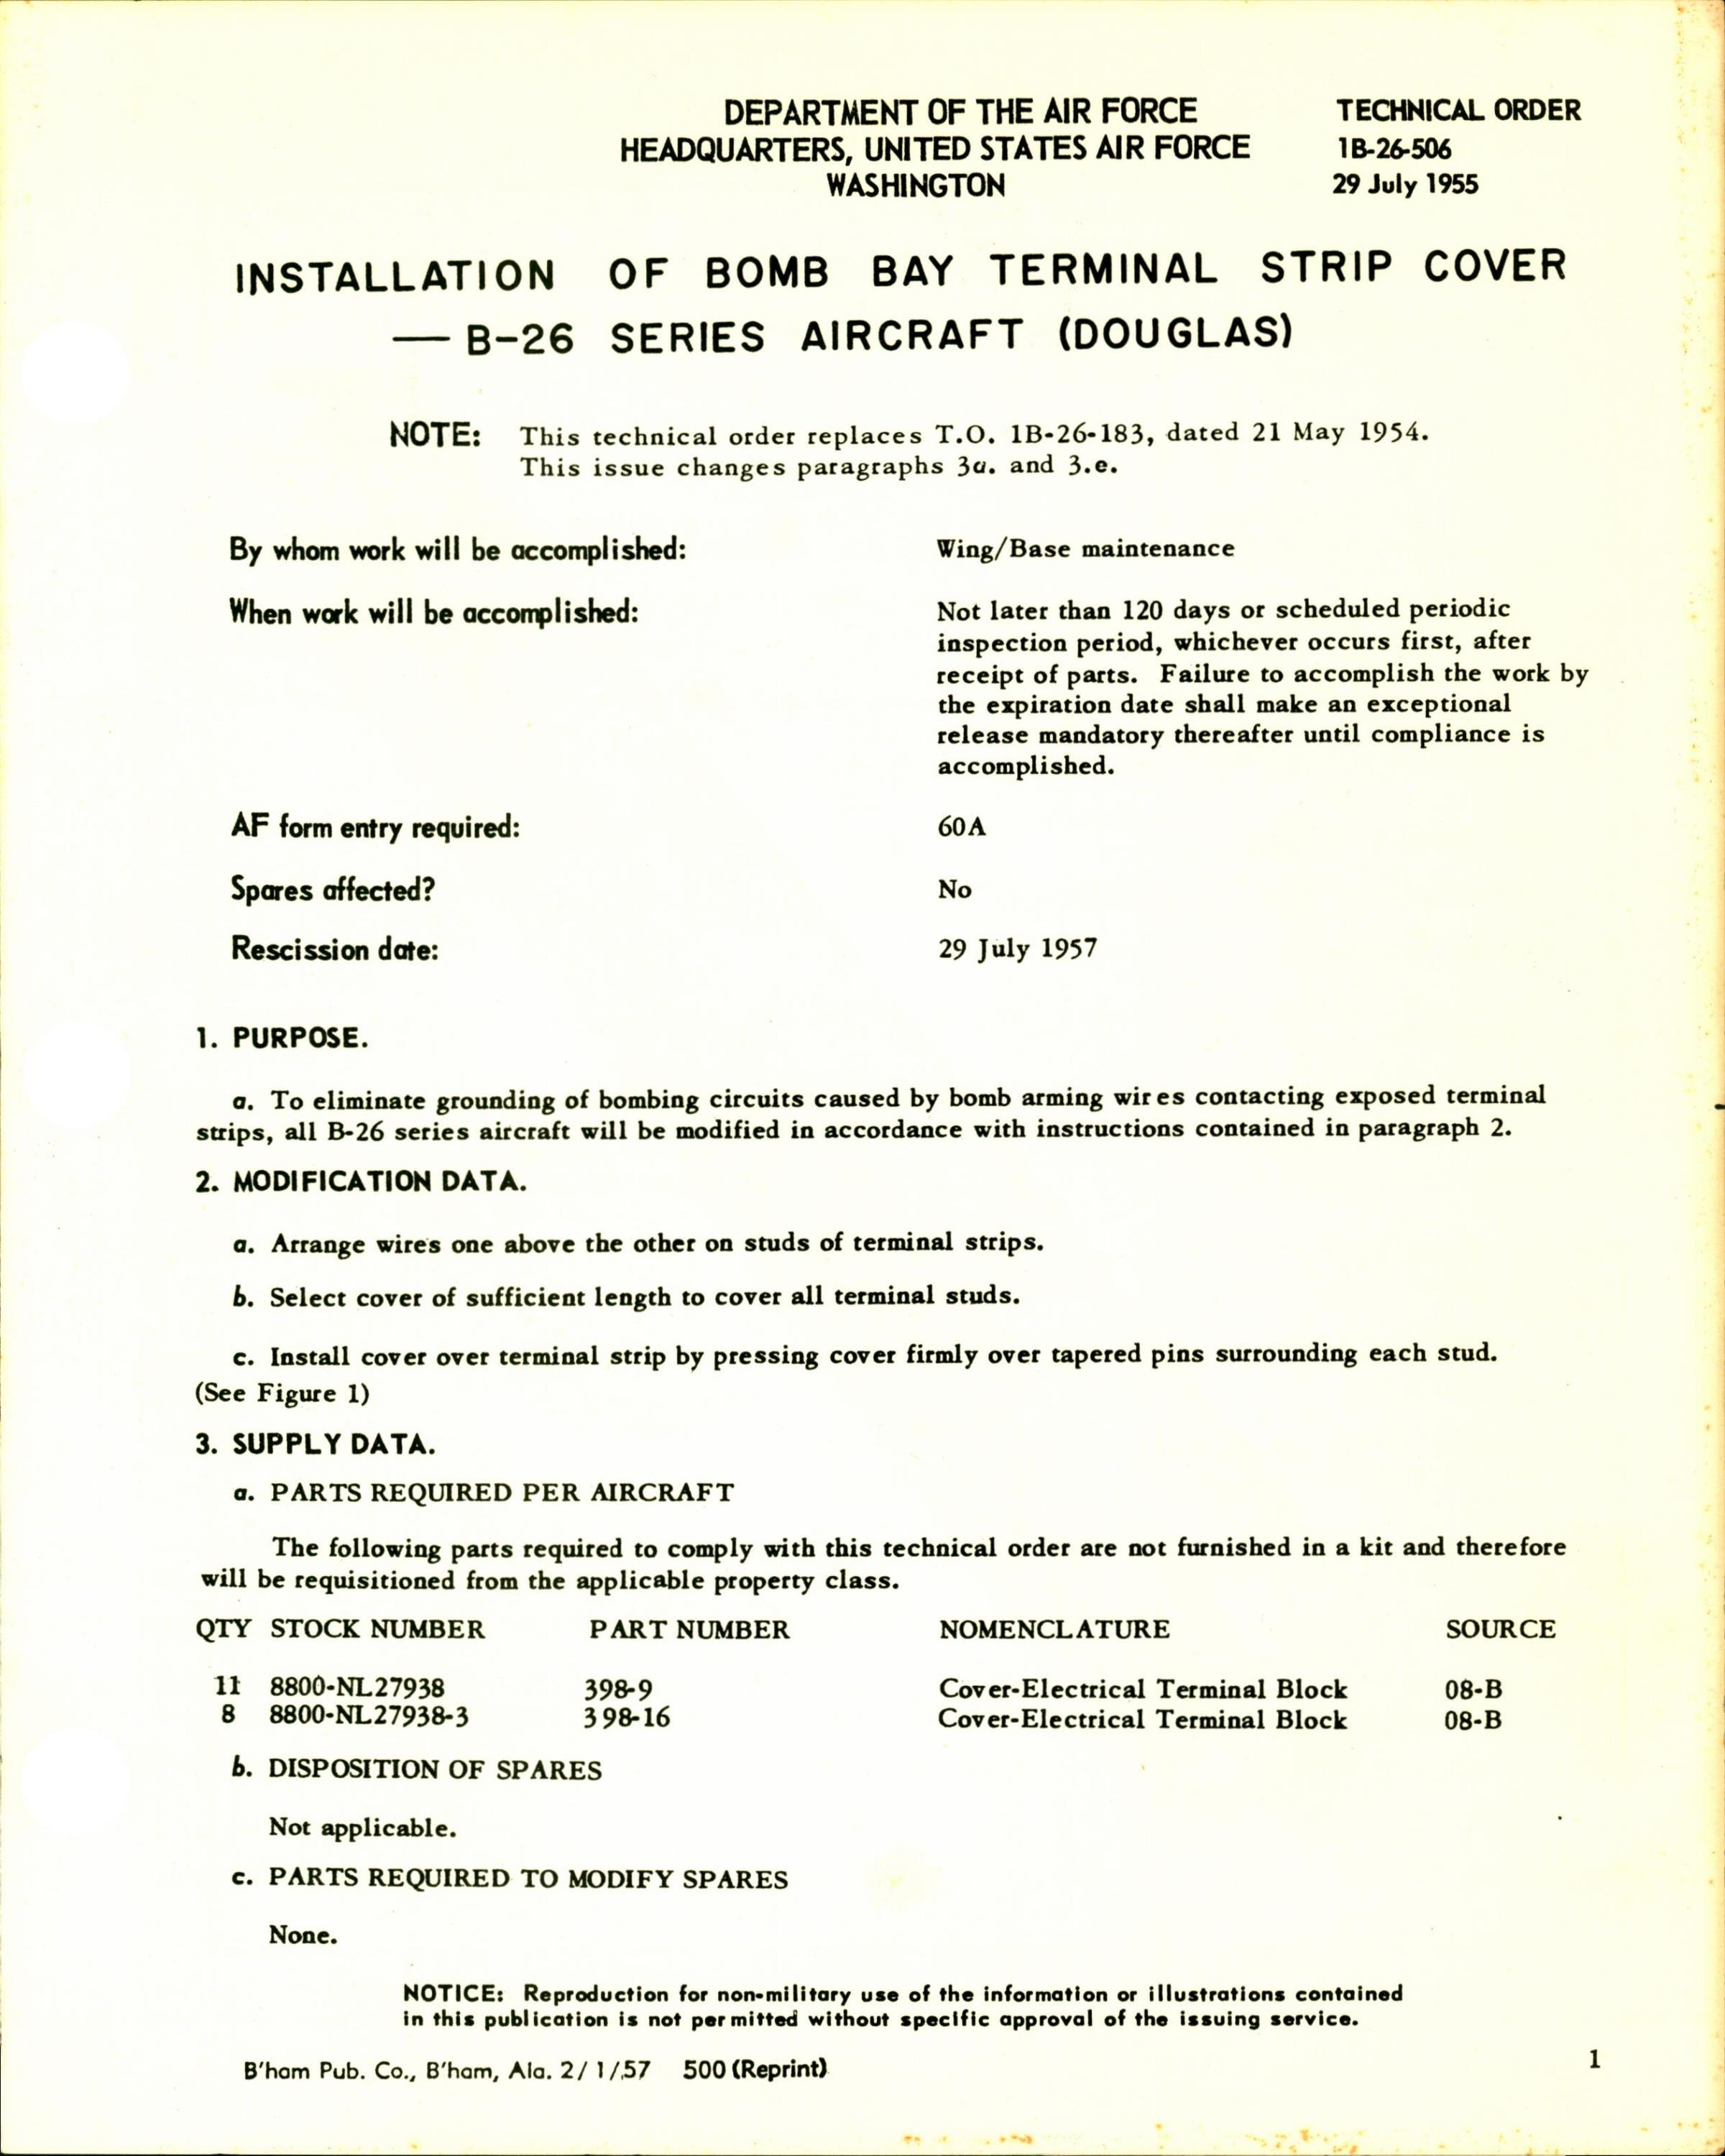 Sample page 1 from AirCorps Library document: Installation of Bomb Bay Terminal Strip Cover for B-26